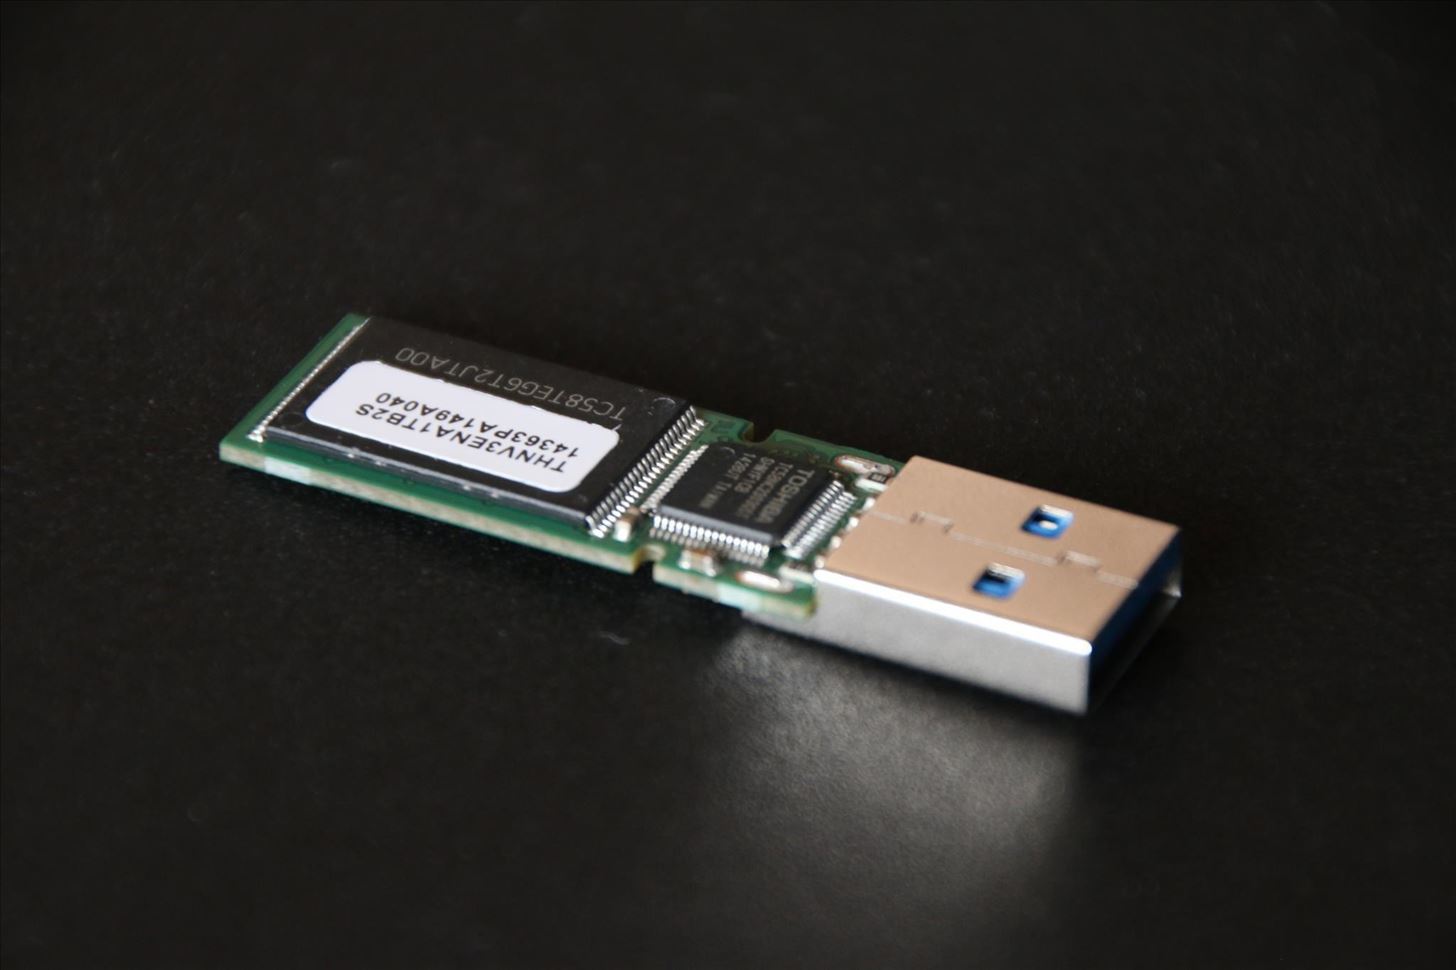 How to Make Your Own Bad USB